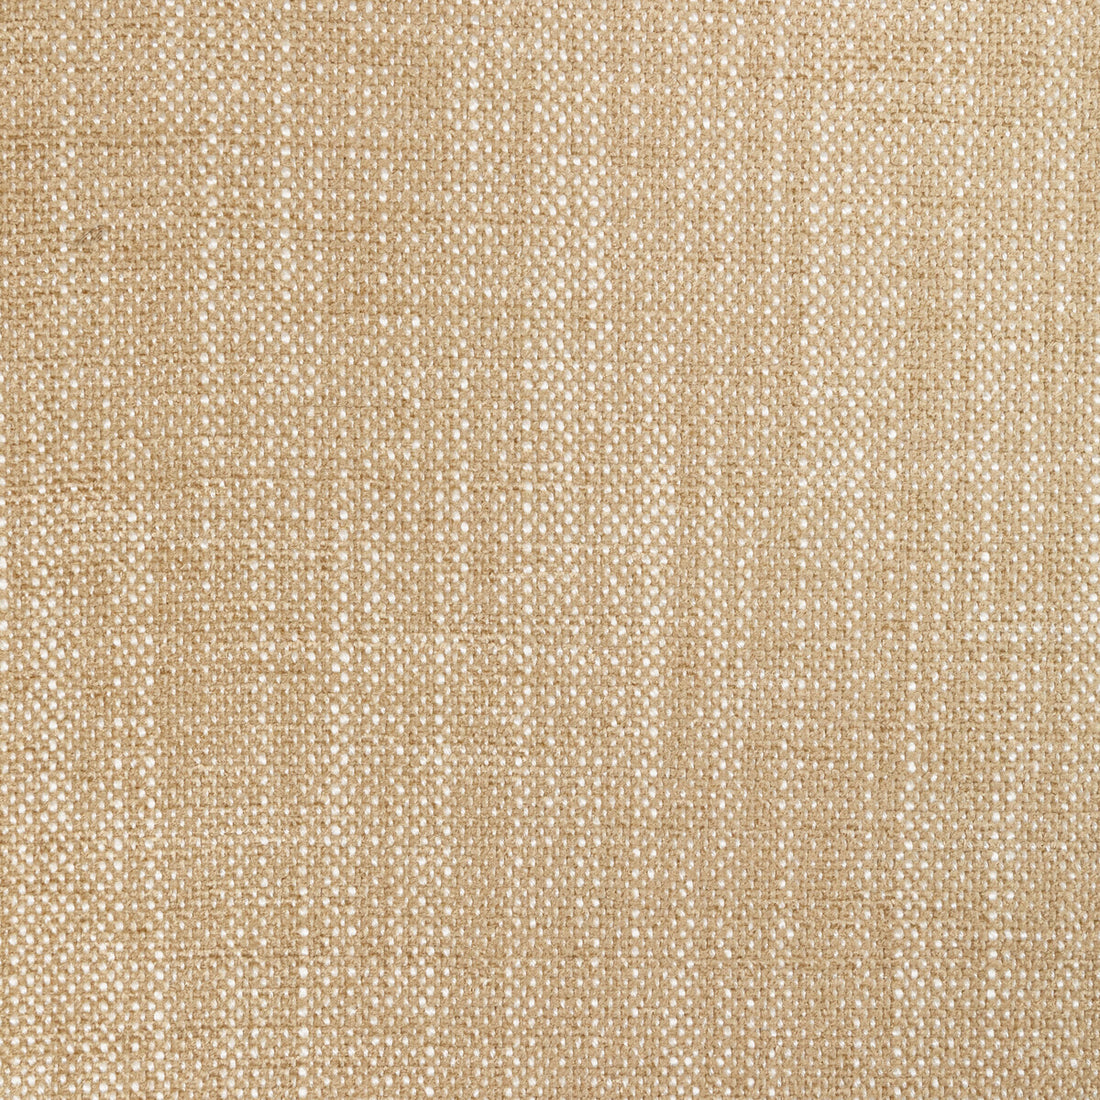 Kravet Design fabric in 36408-16 color - pattern 36408.16.0 - by Kravet Design in the Performance Crypton Home collection